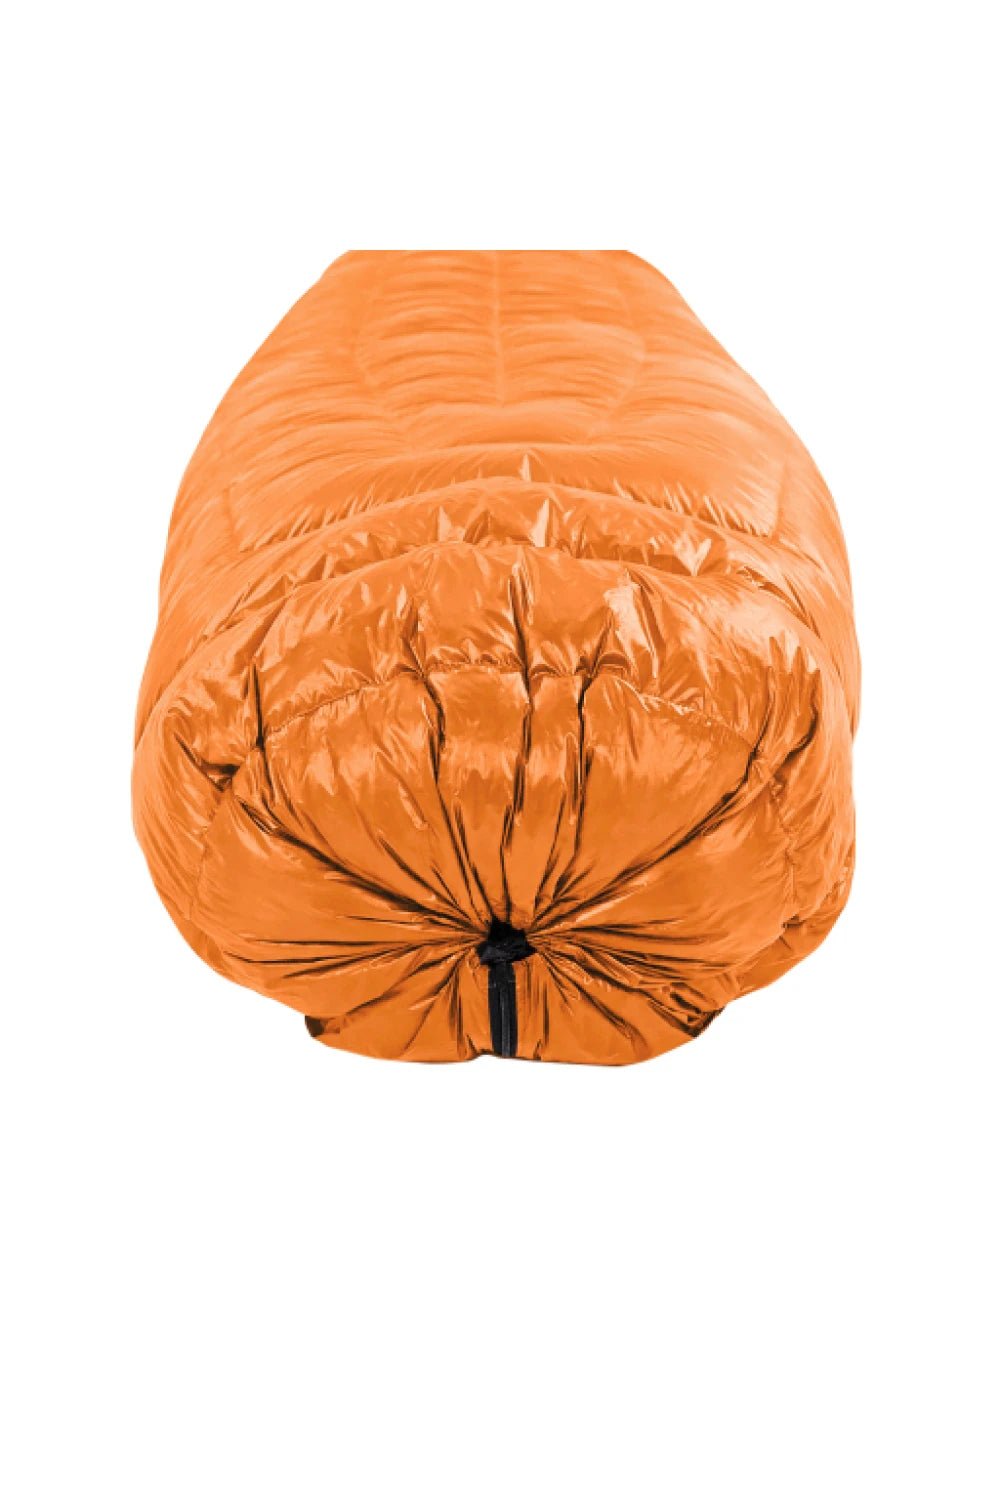 Enlightened Equipment Revelation Quilt 850 Fill Down - Orange / Charcoal | Coffee Outdoors